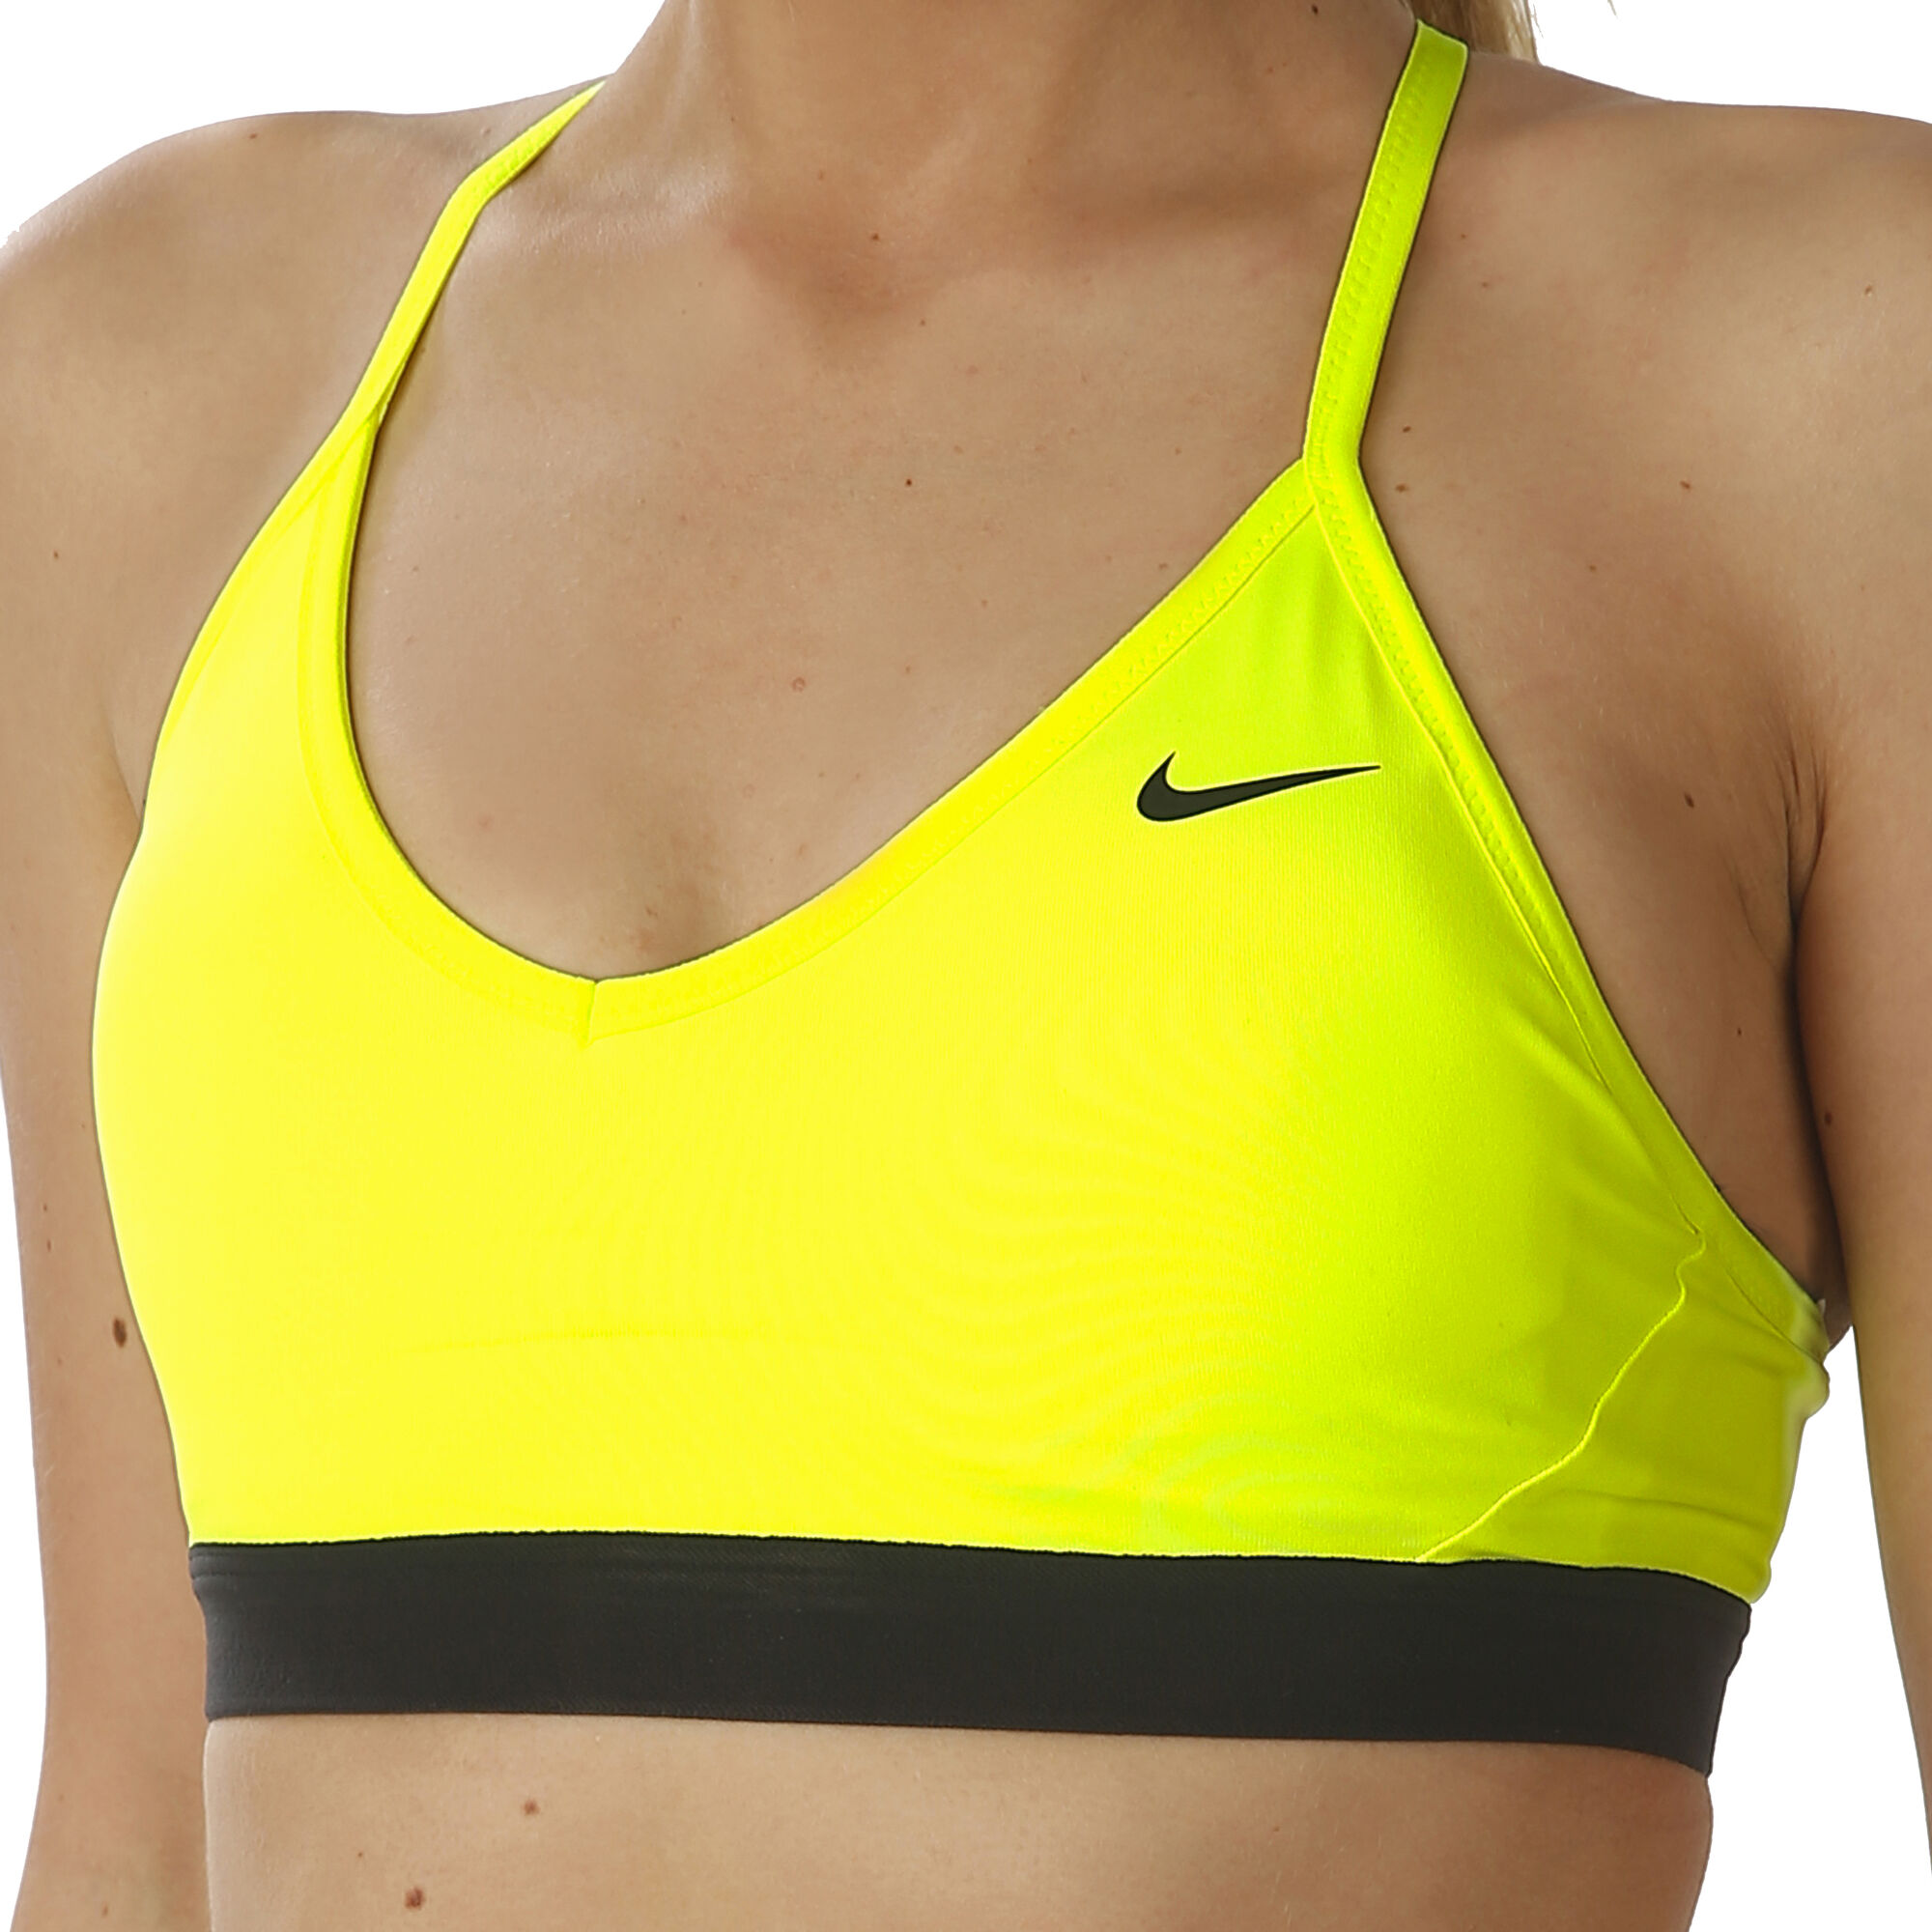 Nike Sports Bra High Support Size Large Neon Yellow Highlighter Bright  Color - $15 (66% Off Retail) - From Royal